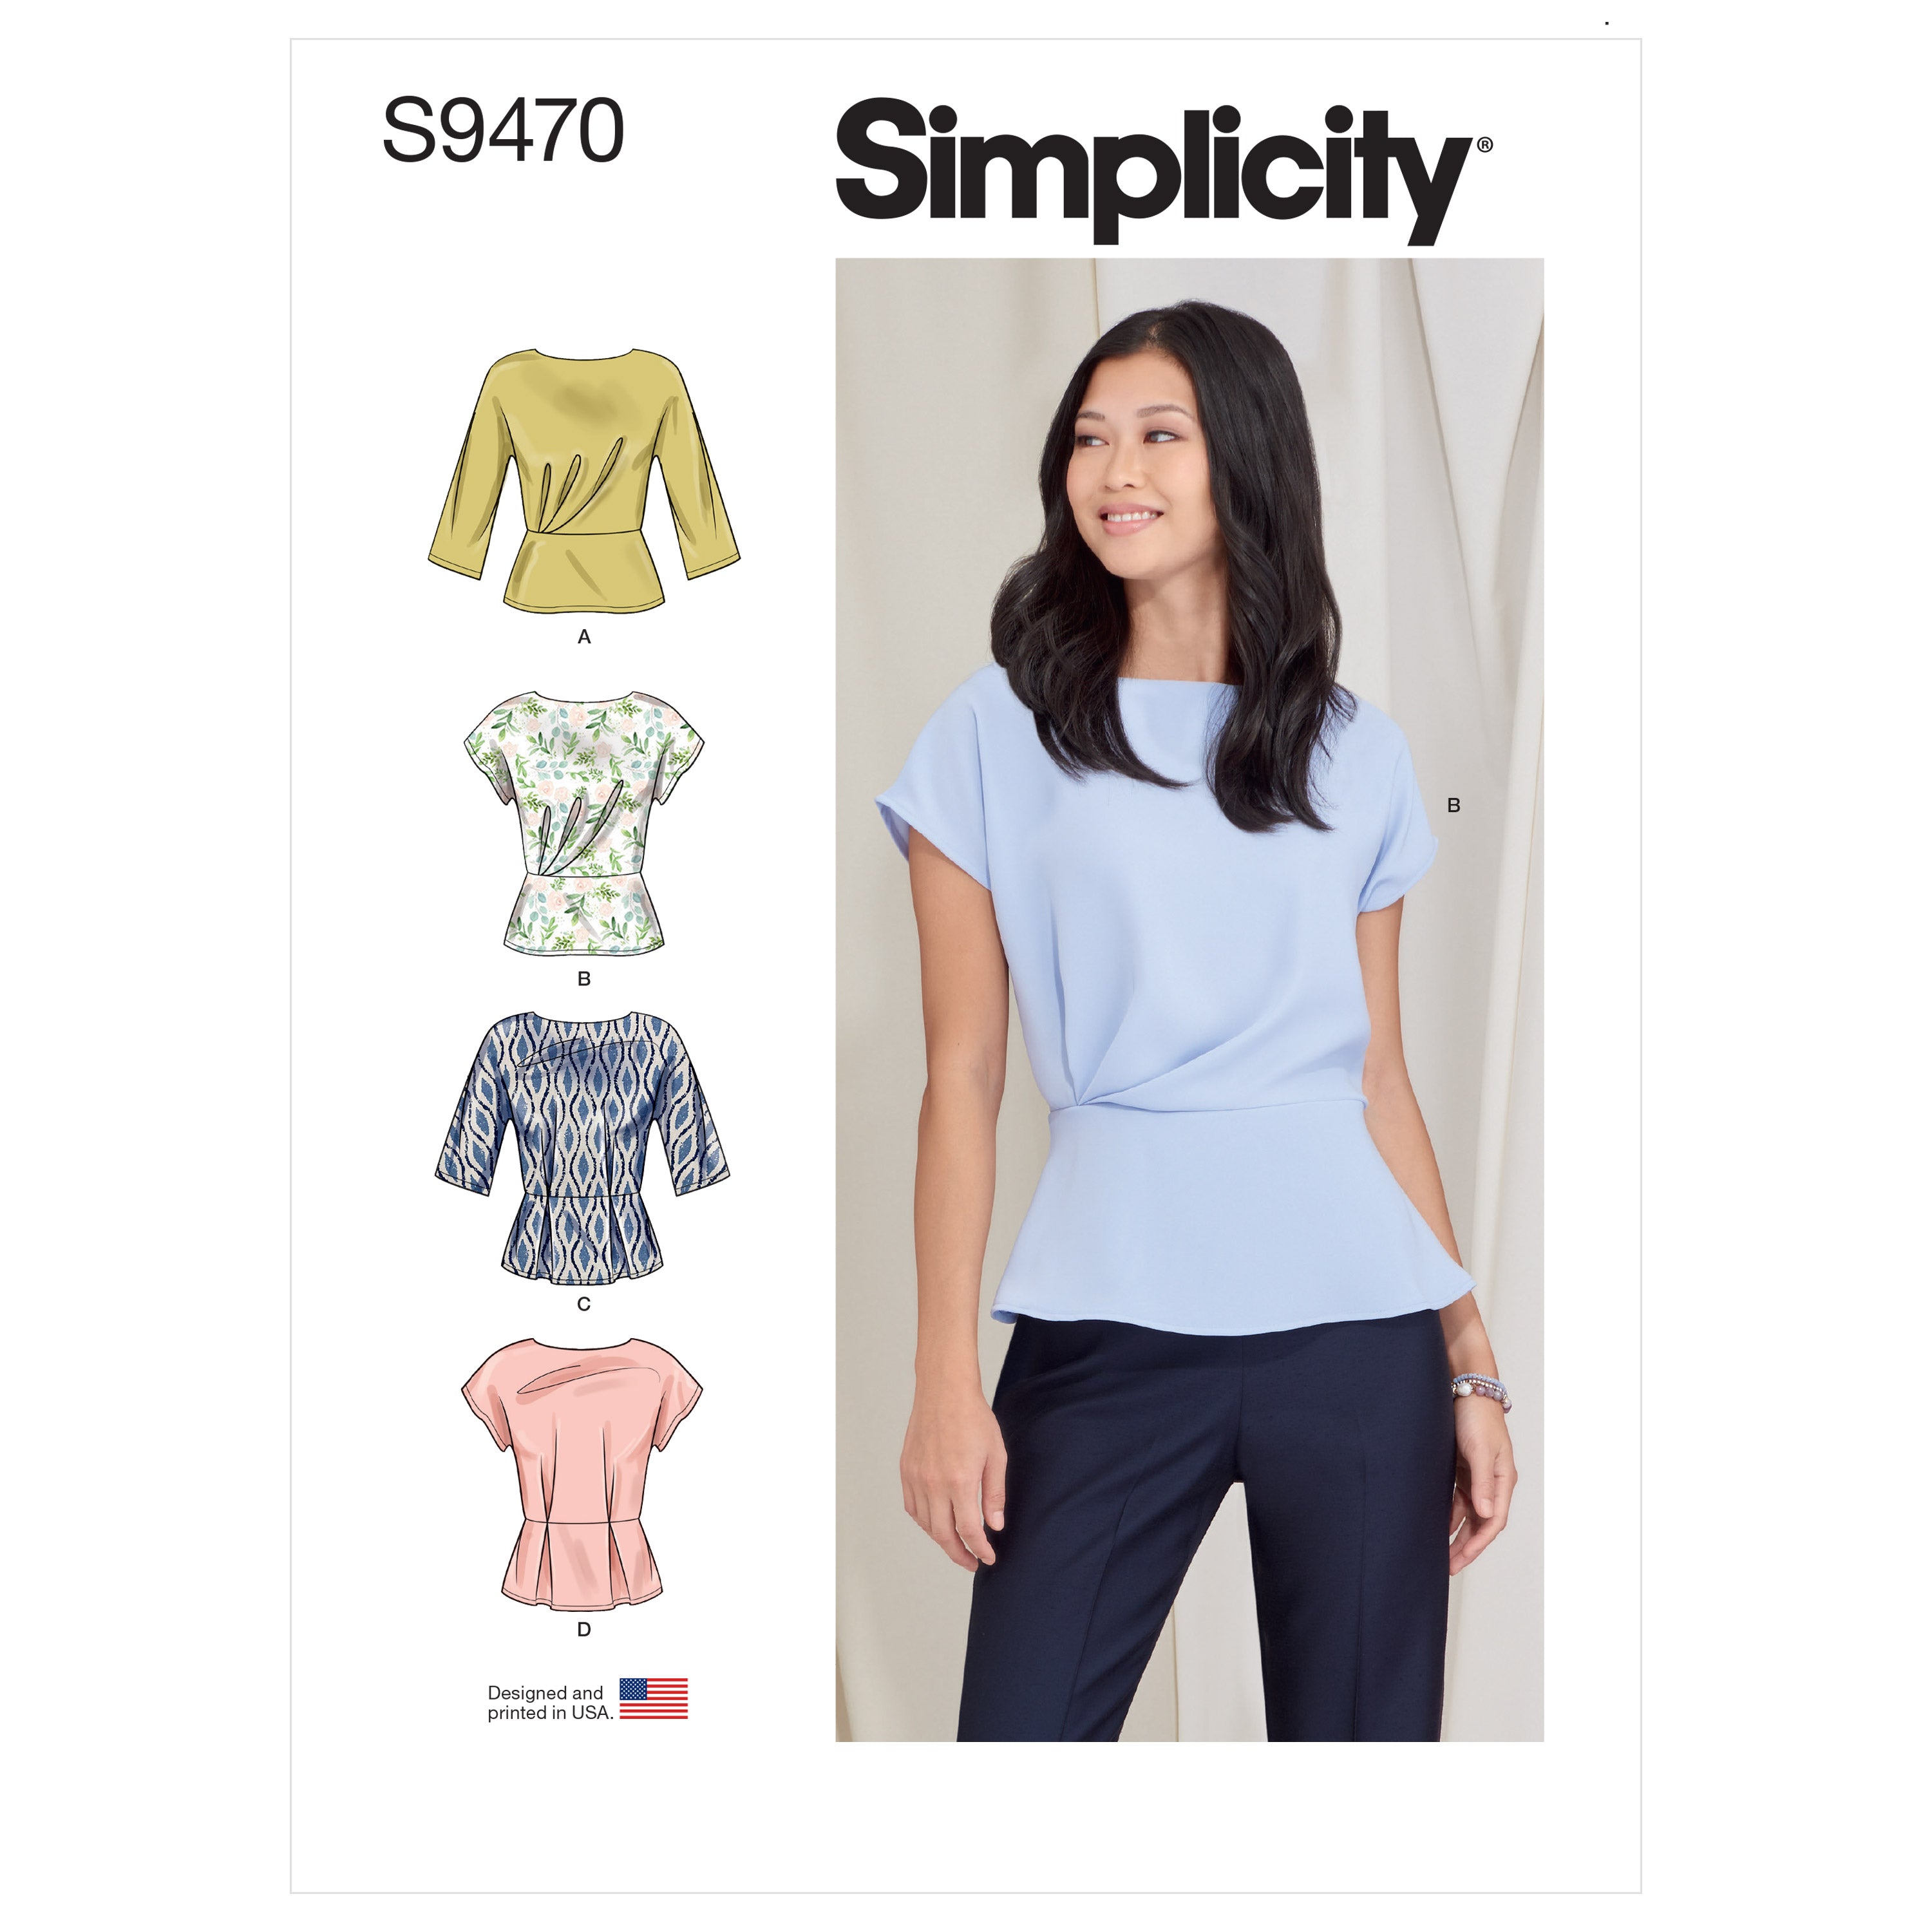 Simplicity Sewing Pattern 9470 Misses Tops from Jaycotts Sewing Supplies